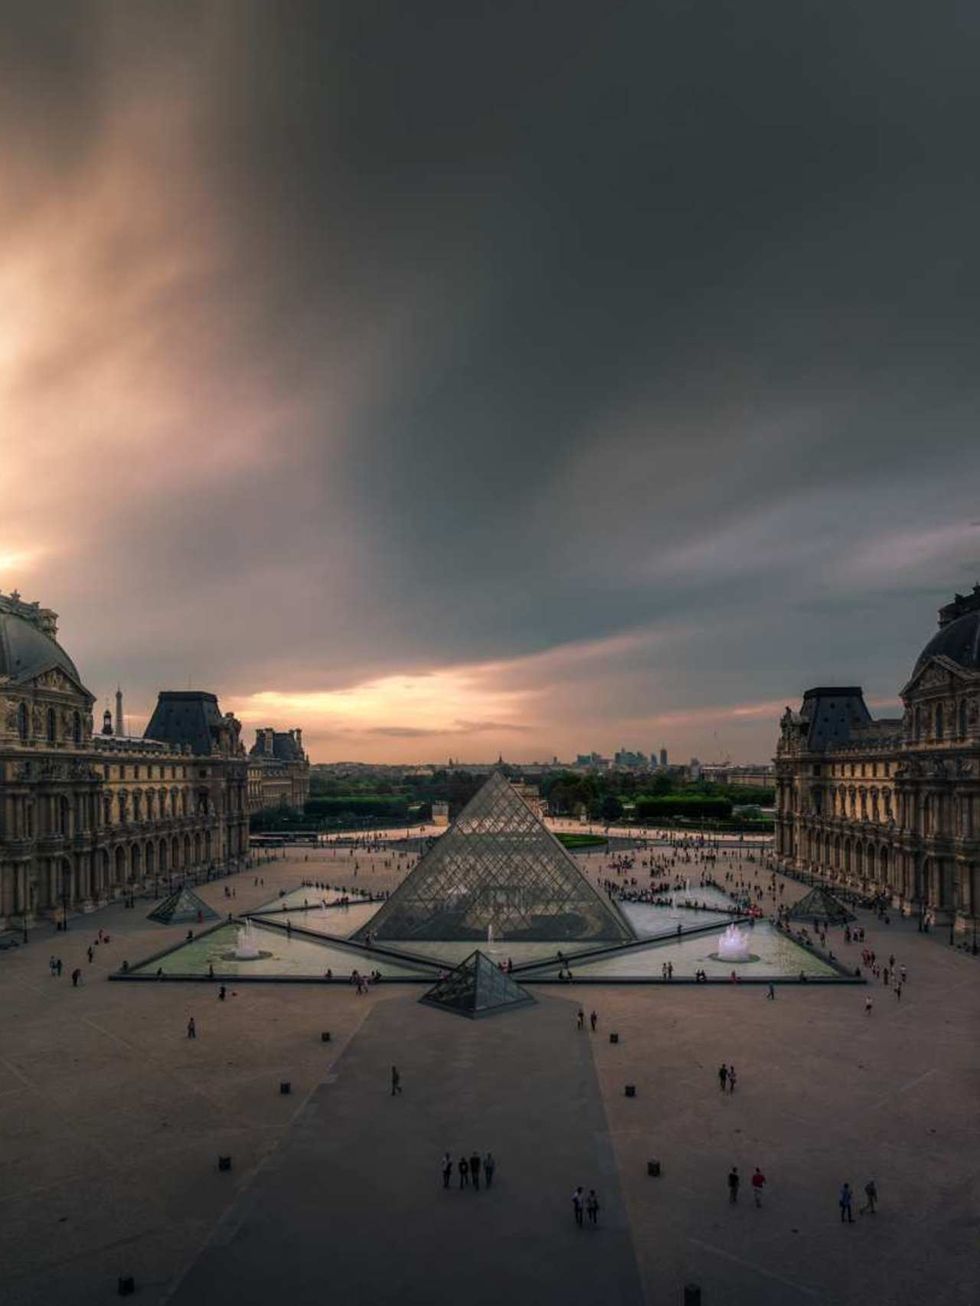 Cloud, City, Dusk, Landmark, Evening, Sunset, Dome, Palace, Water feature, Town square, 